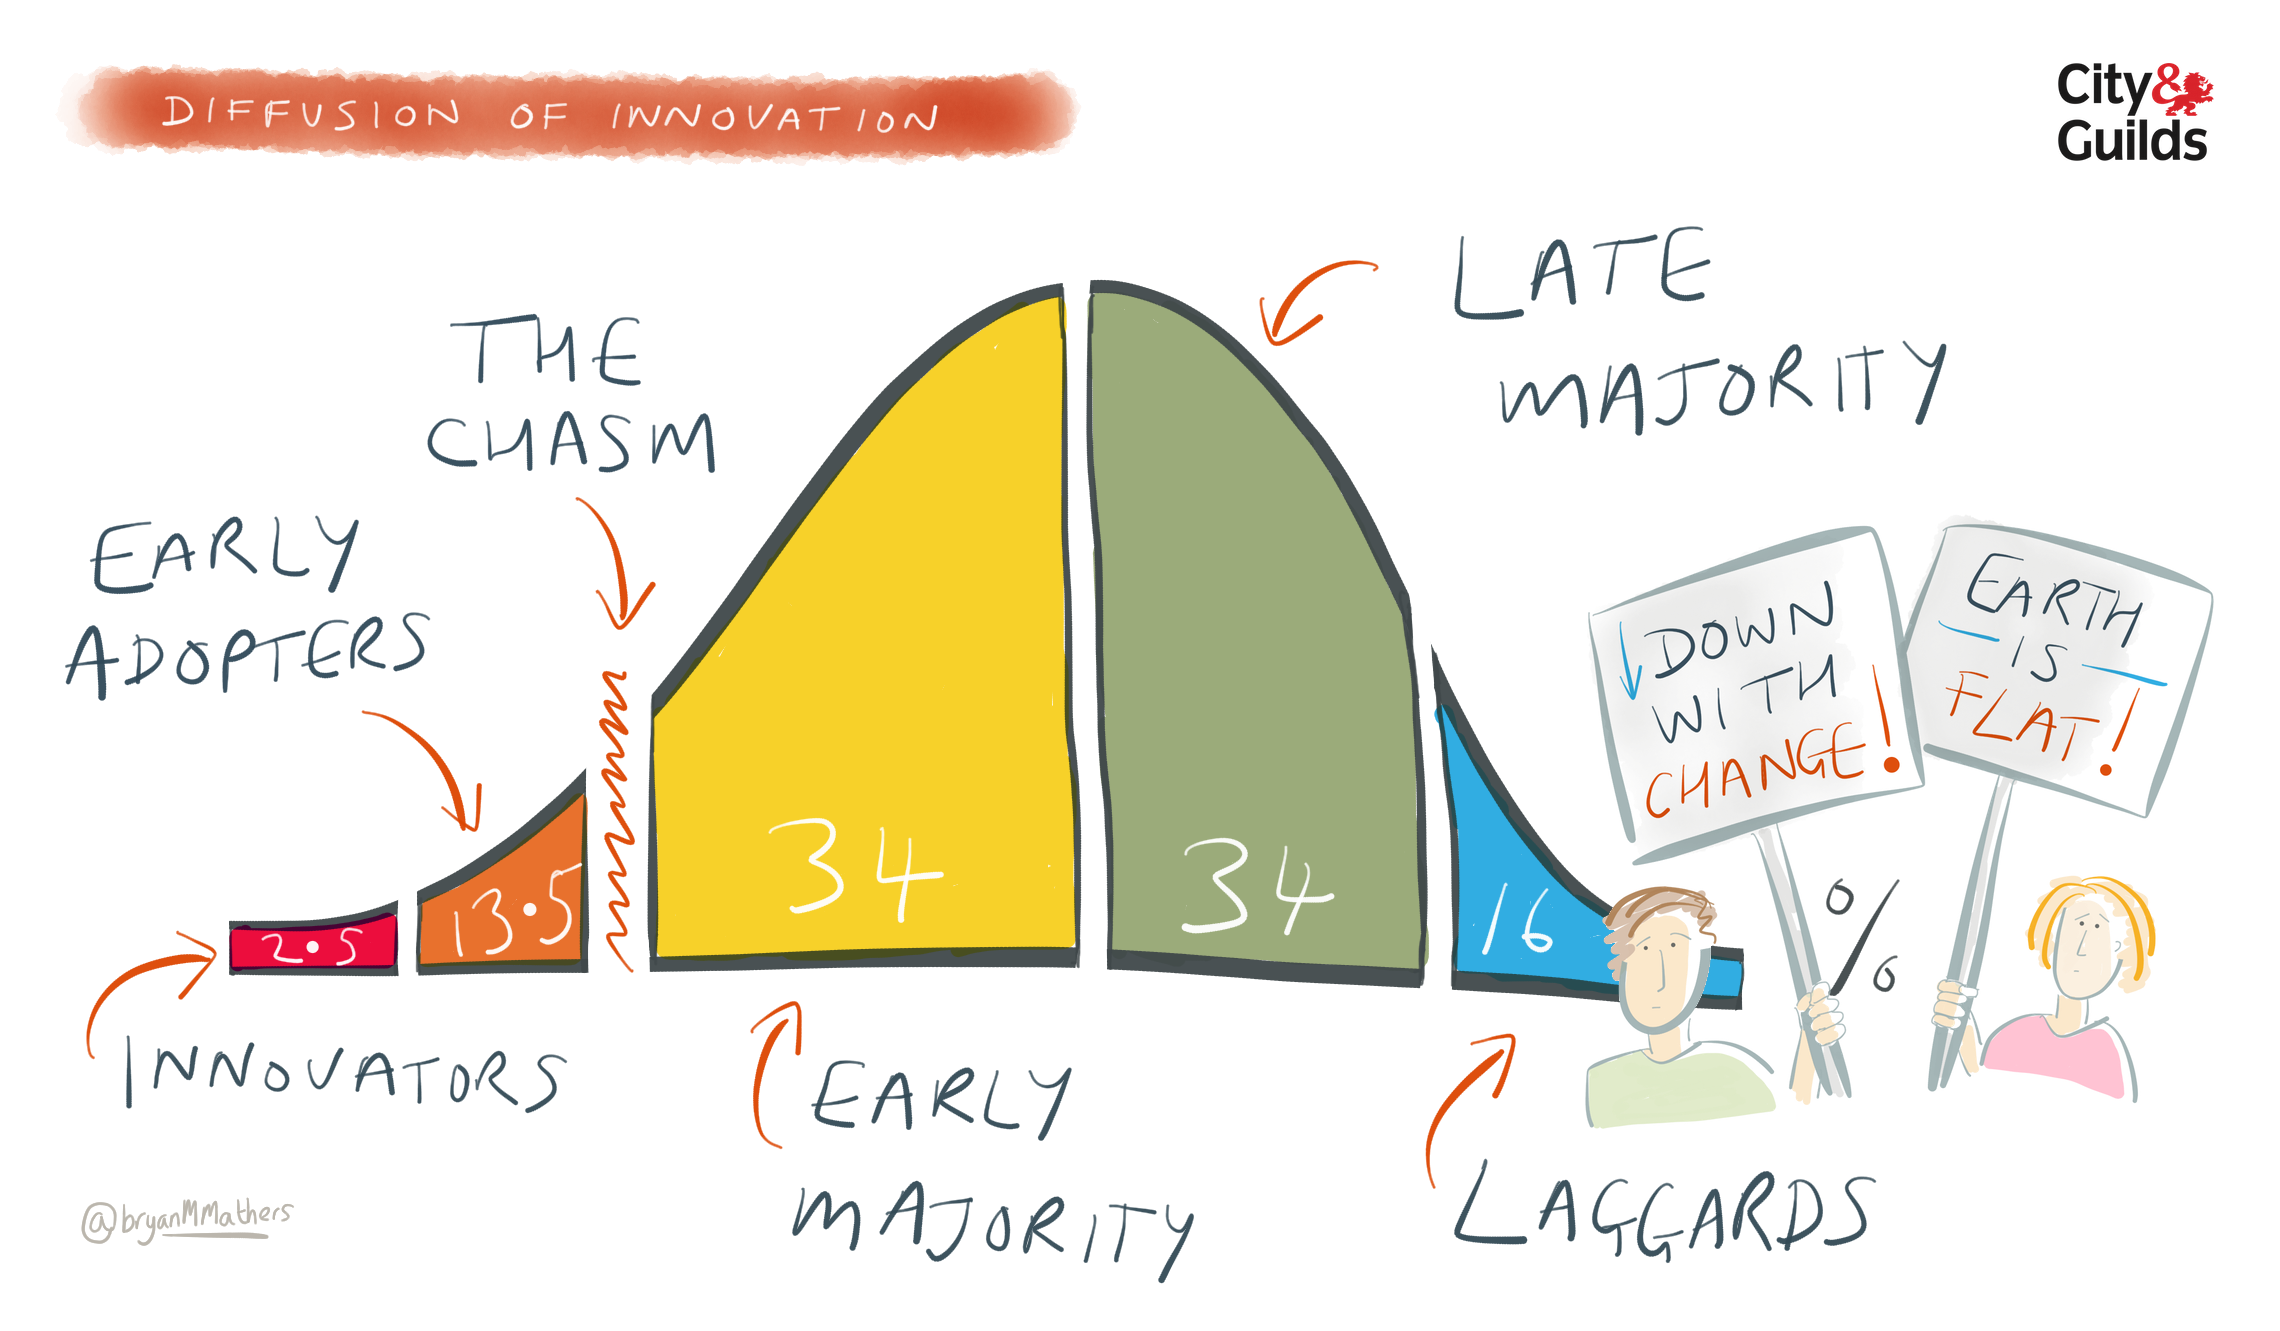 Illustration of the Diffusion of Innovation, consisting of the innovators (2.5%), early adopters (13.5%), early majority (34%), late majority (34%), and the laggards (16%)